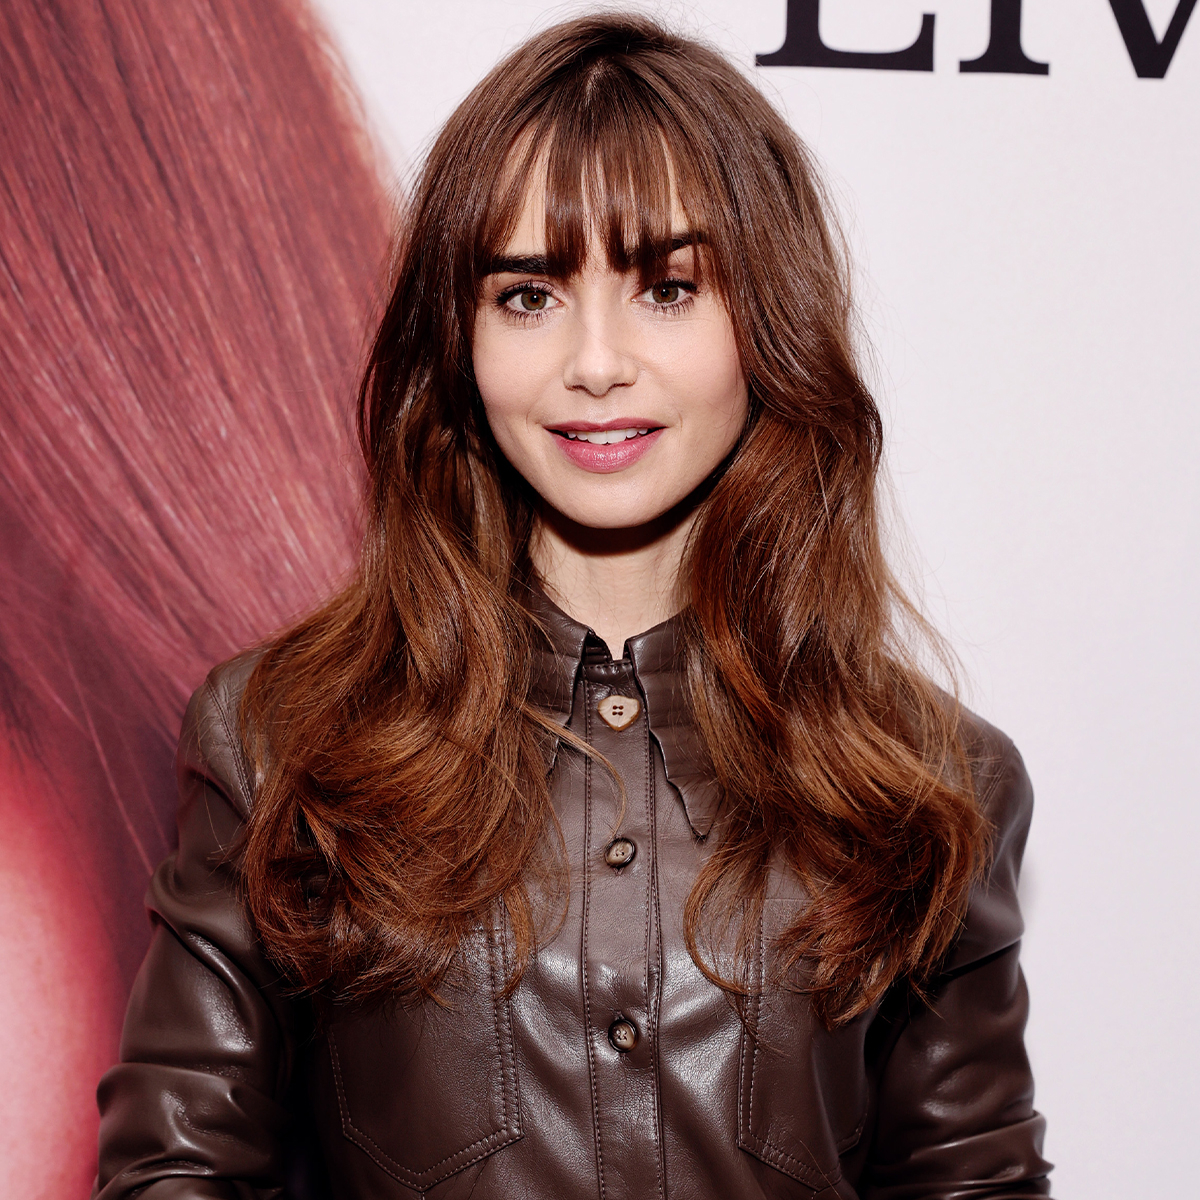 Lily Collins Ditches Emily in Paris Style for New Bob Haircut